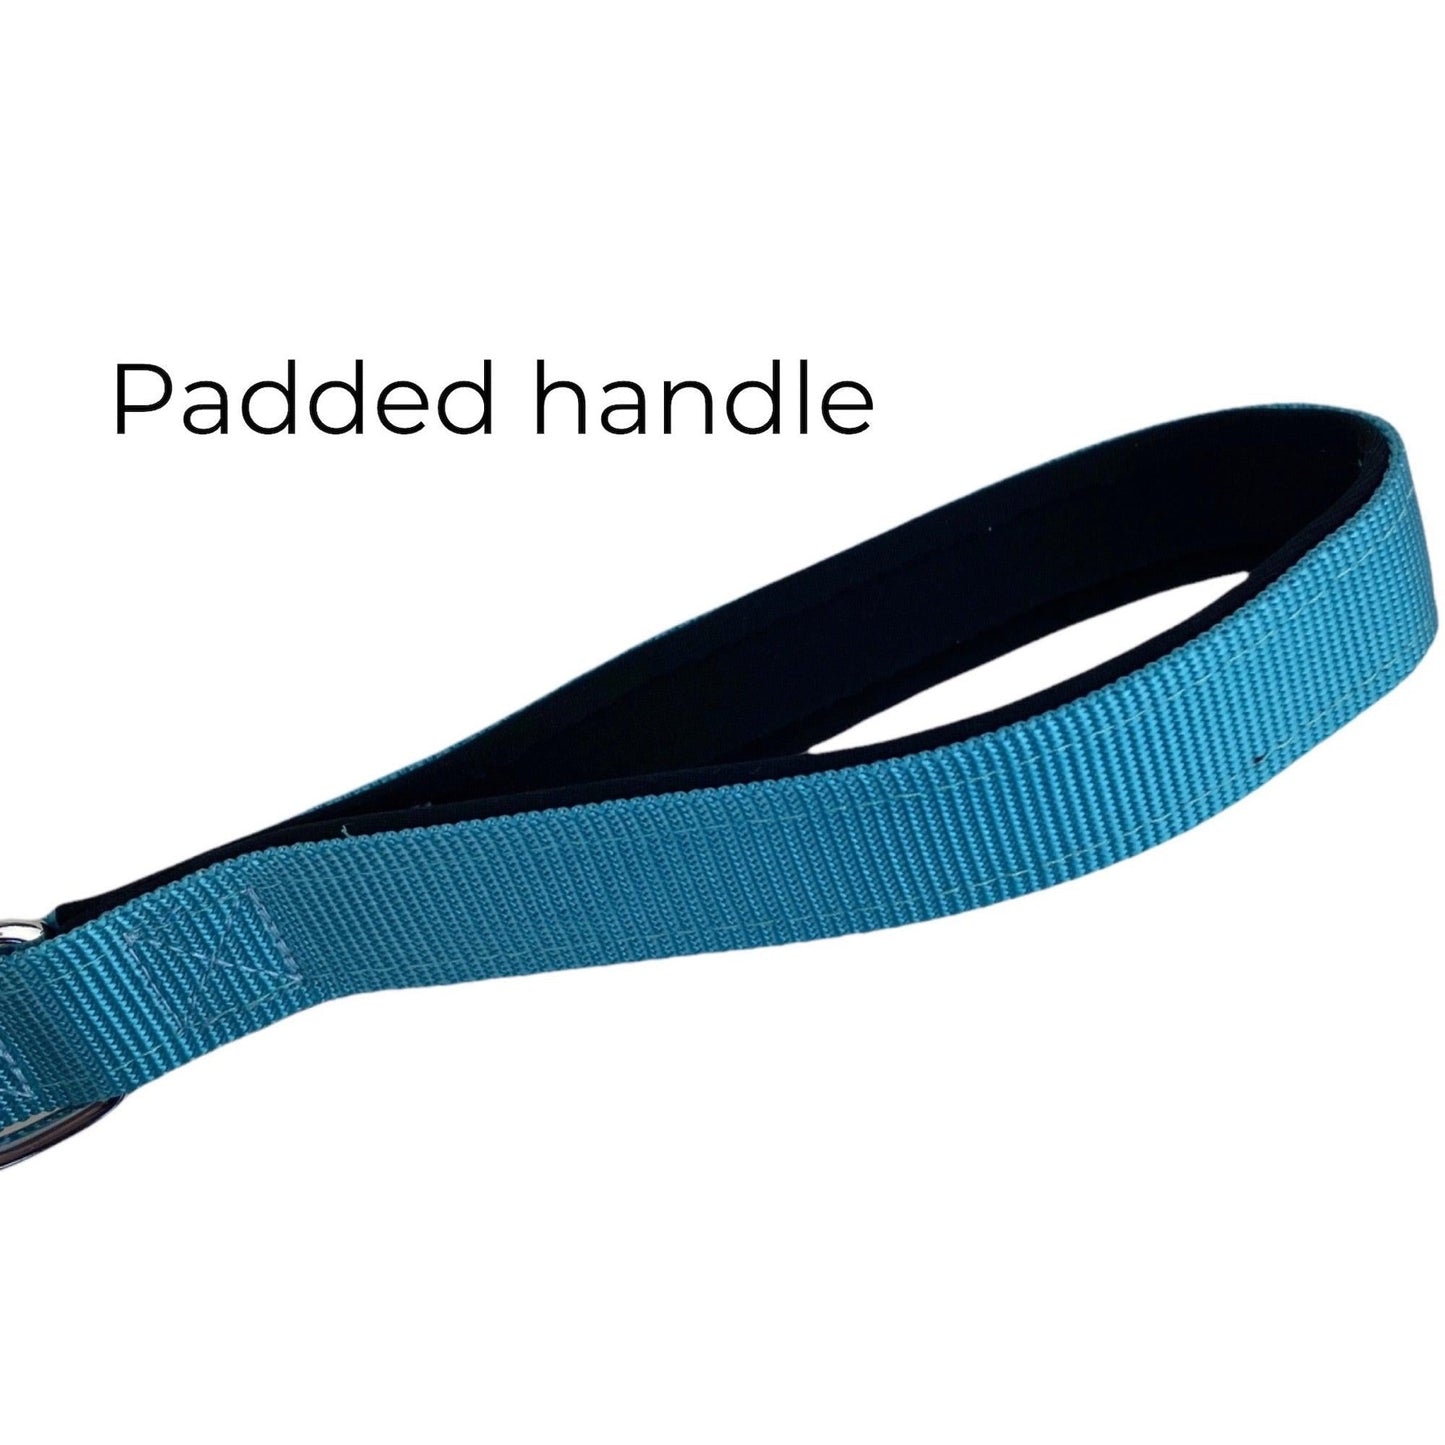 Adjustable Dog Leash 3-5.5 ft with Padded Handle - Teal Blue - FearLess Pet